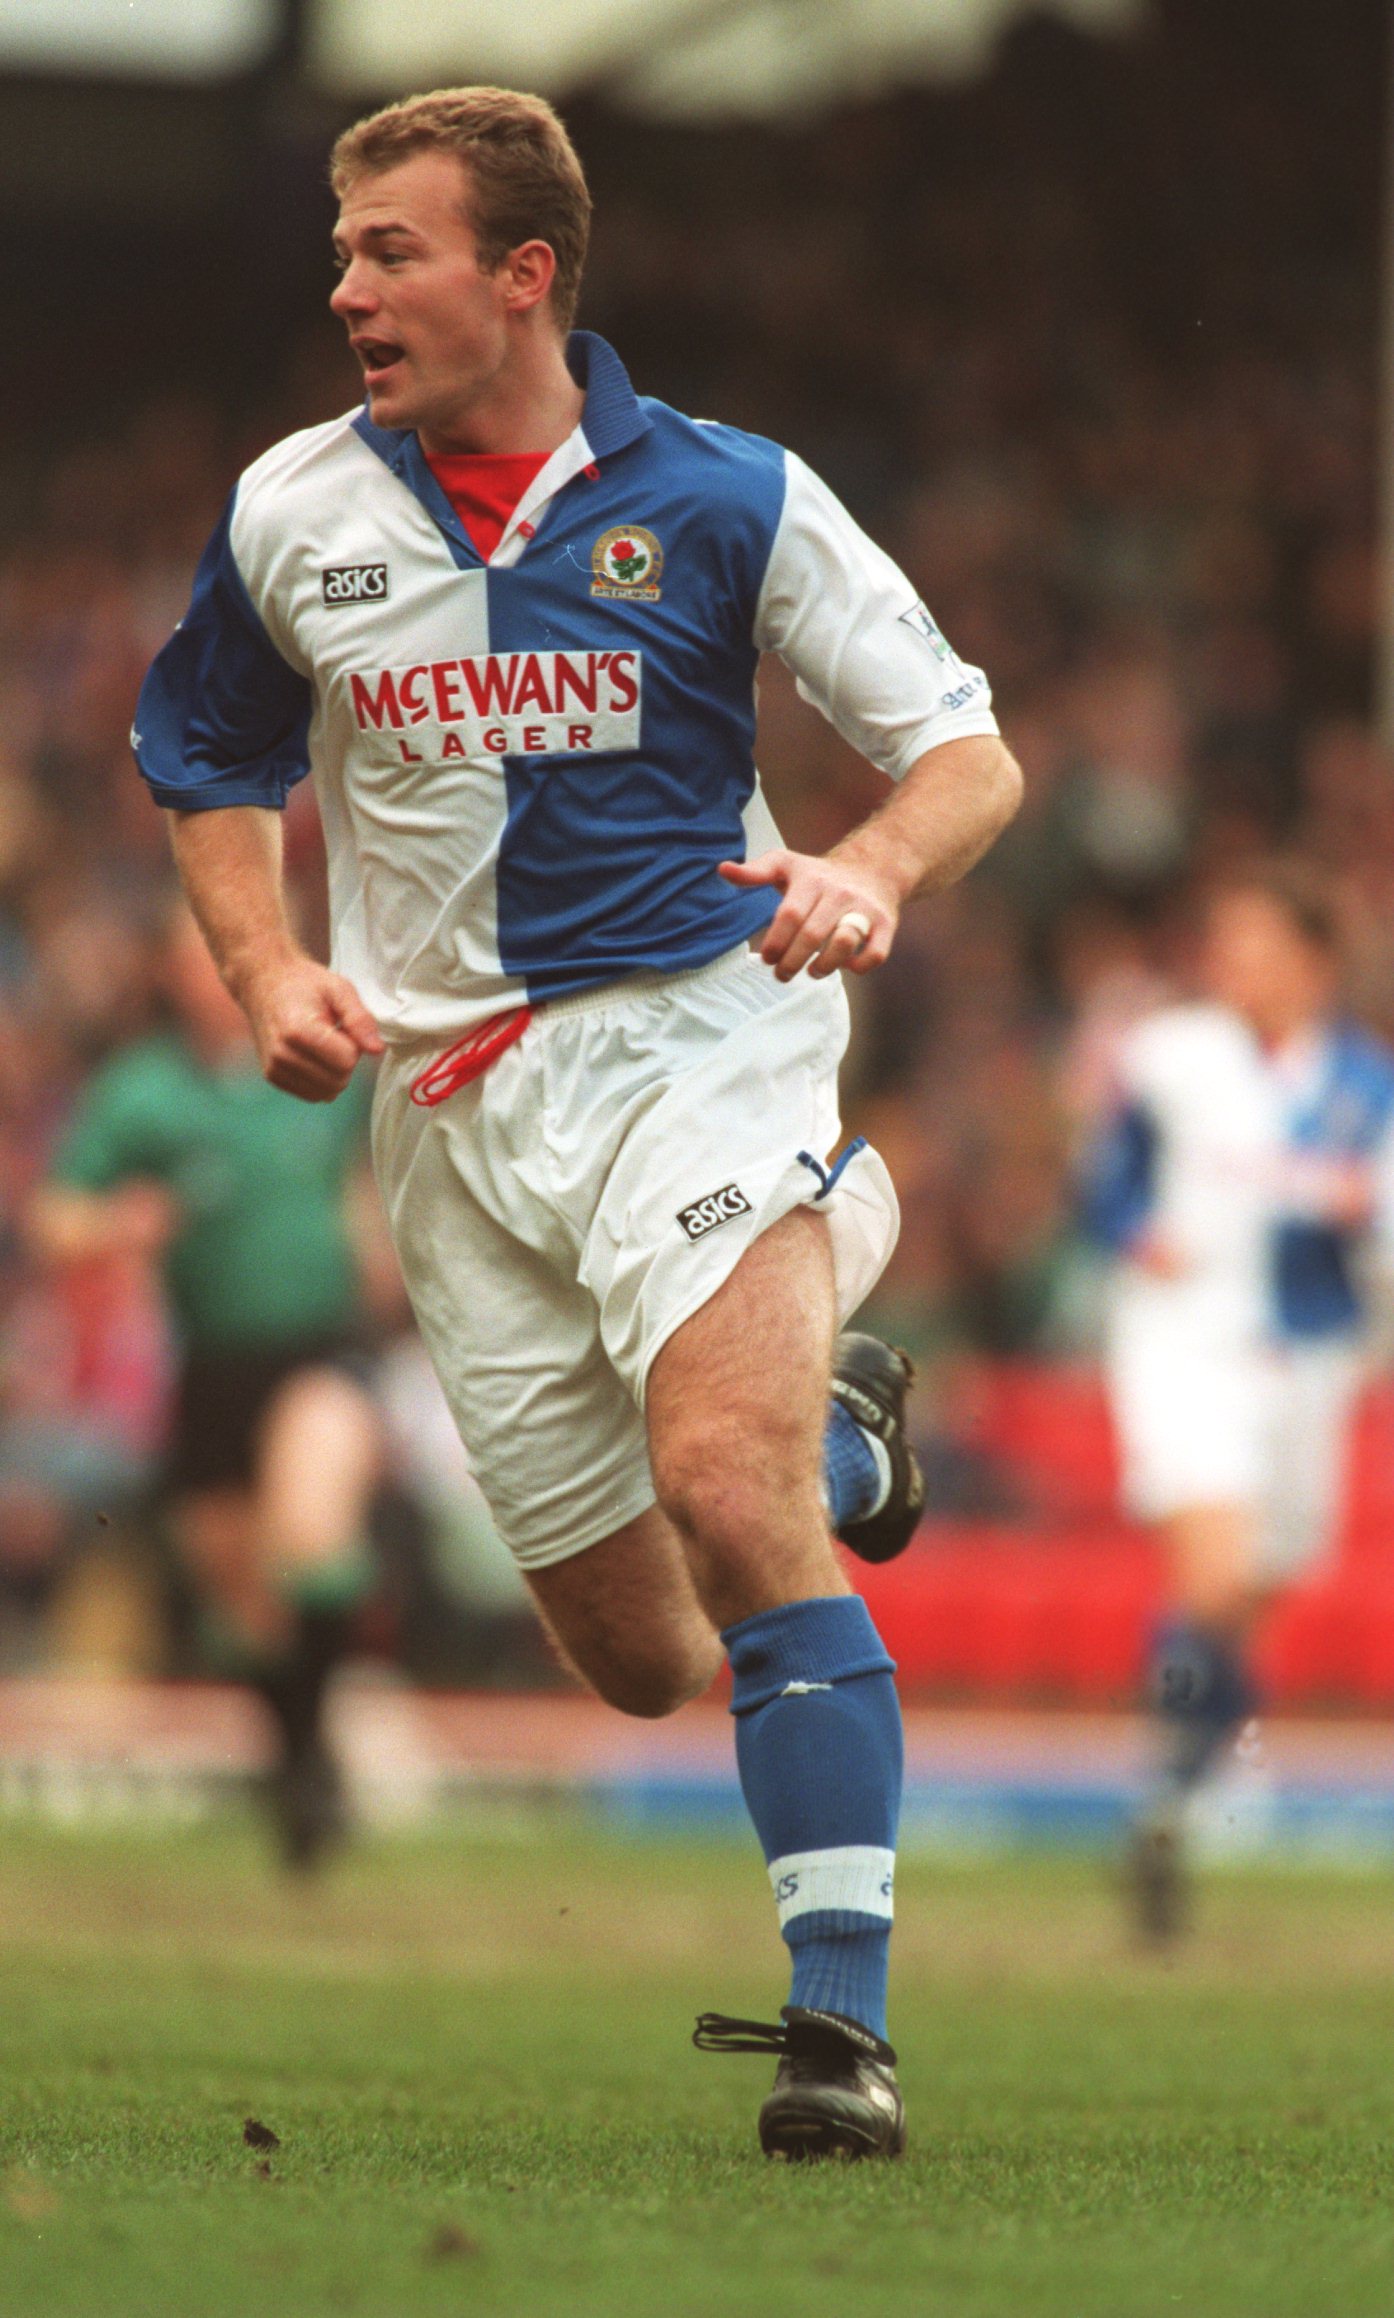 18 MAR 1995:  ALAN SHEARER OF BLACKBURN ROVERS IN ACTION DURING A PREMIERSHIP MATCH AGAINST CHELSEA AT EWOOD PARK. BLACKBURN WON THE GAME 2-1. Mandatory Credit: Gary M. Prior/ALLSPORT